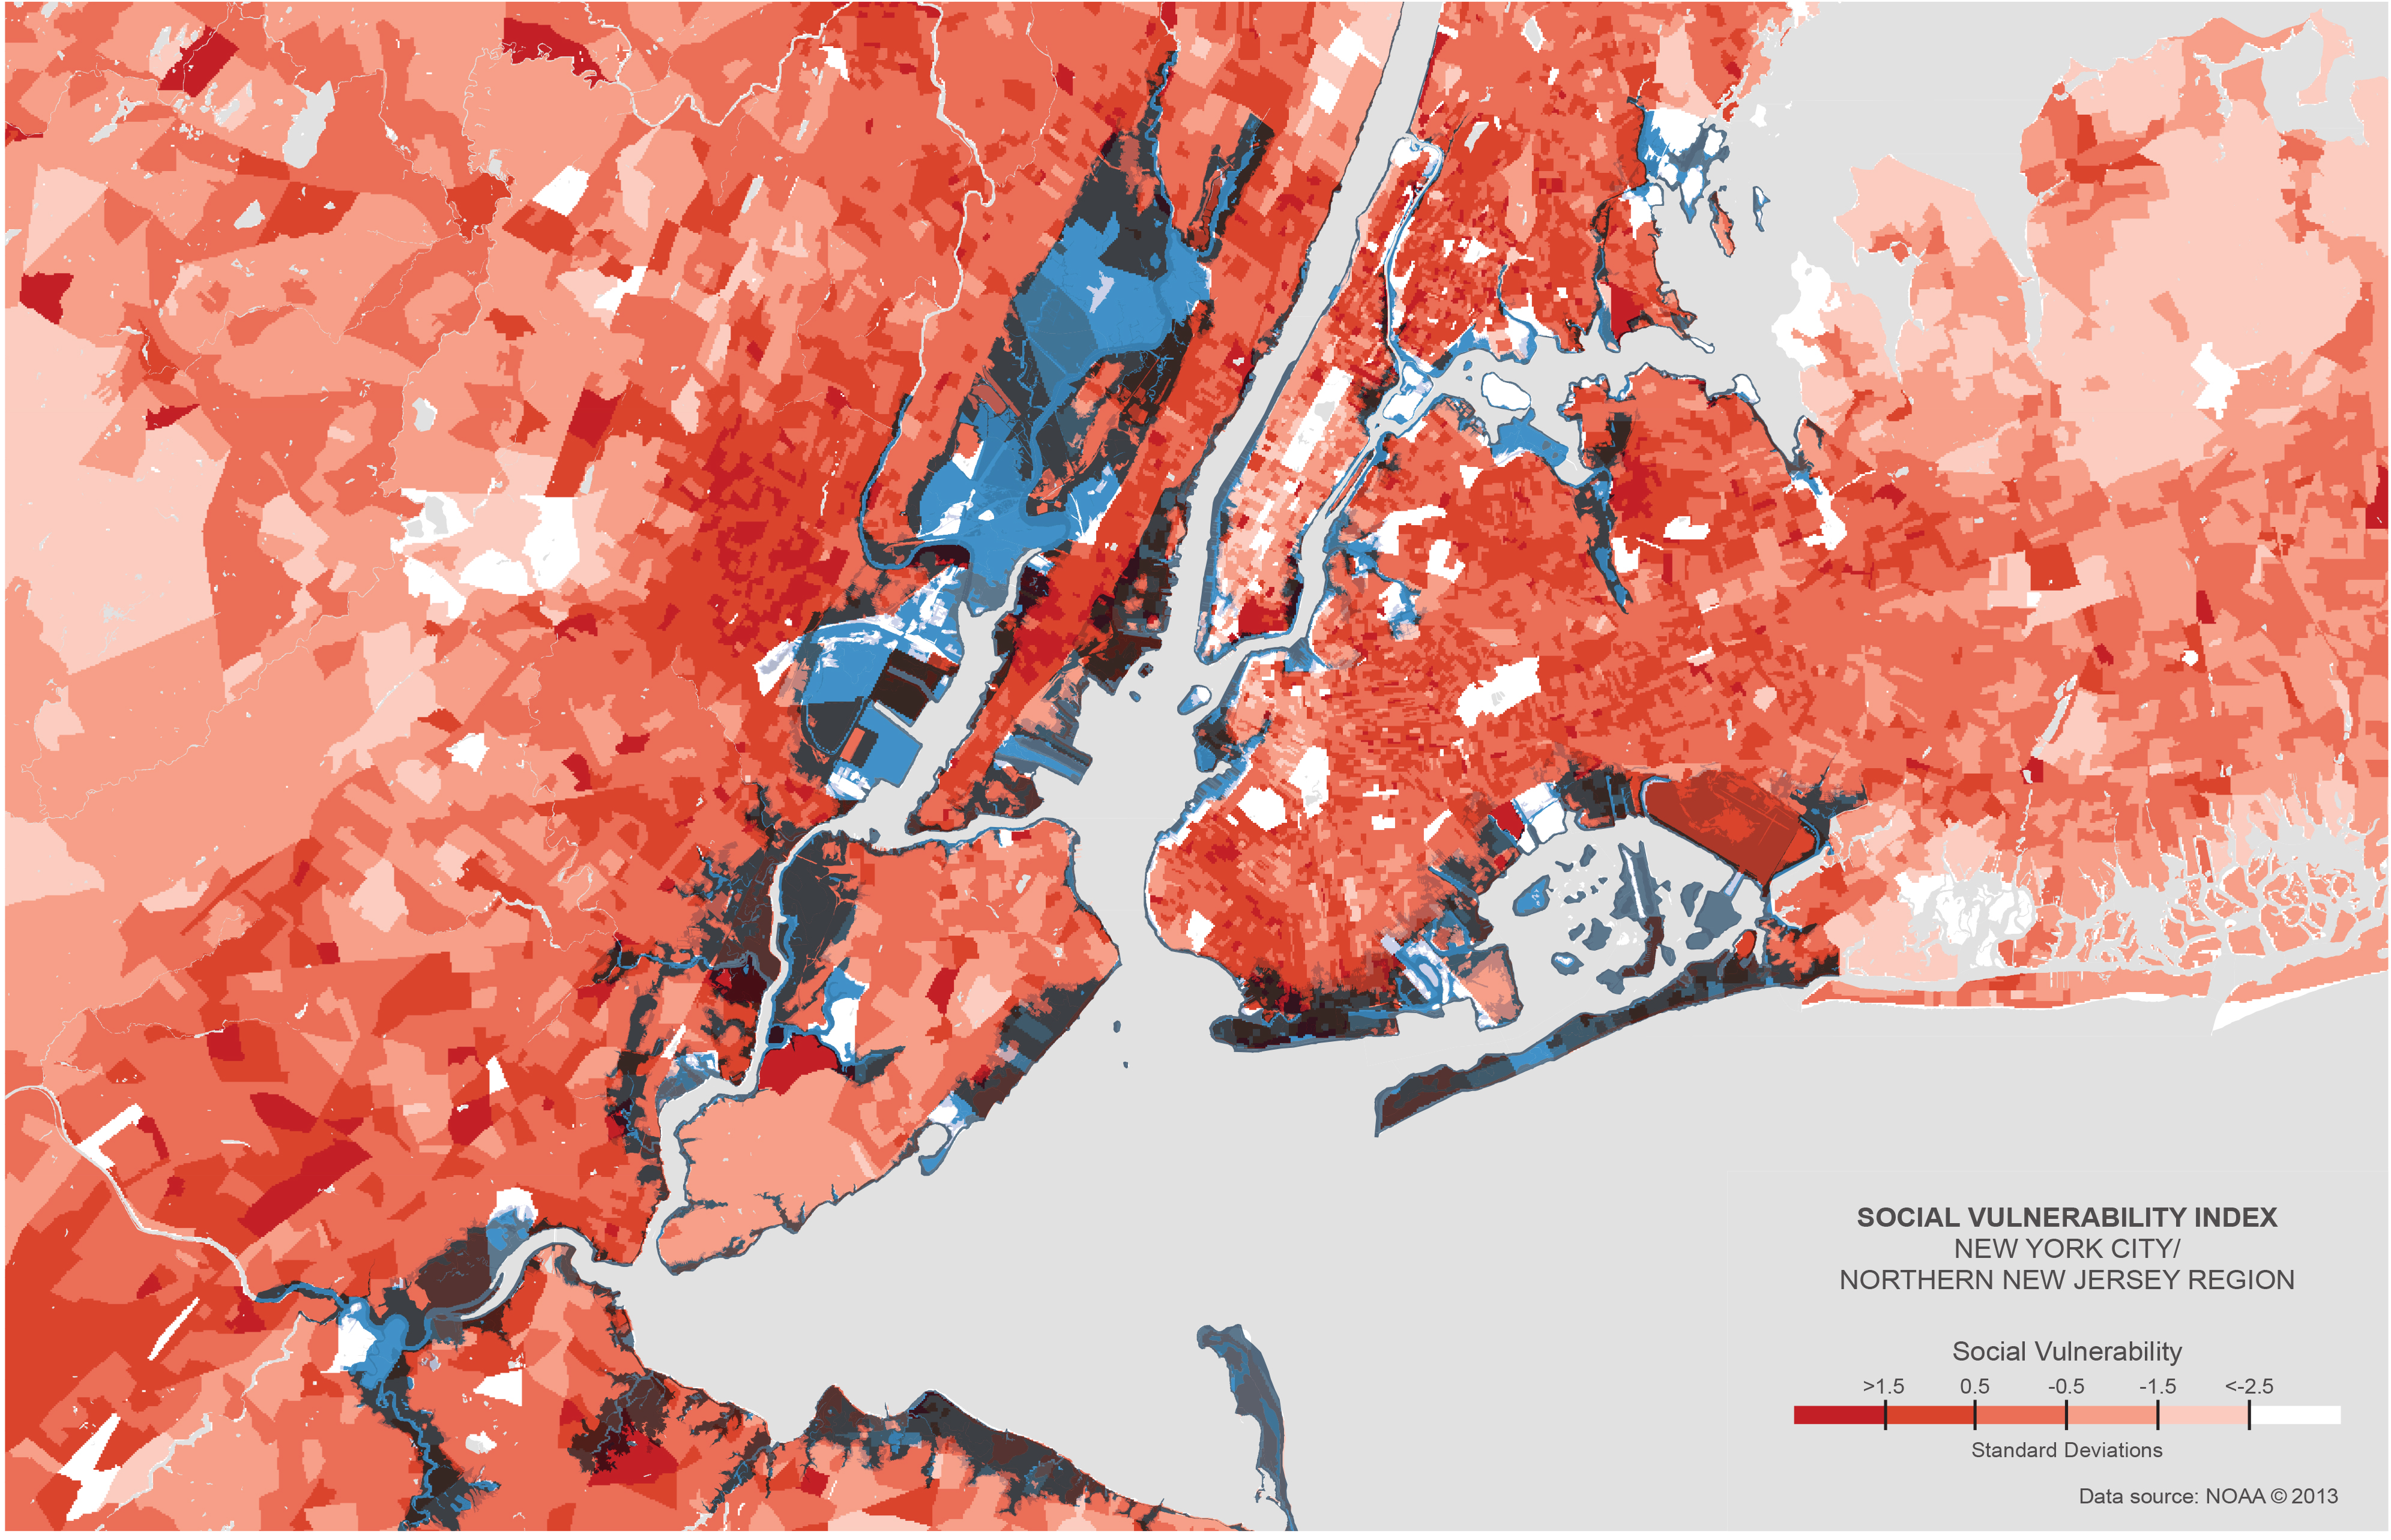 Map showing the Social Vulnerability Index for NYC